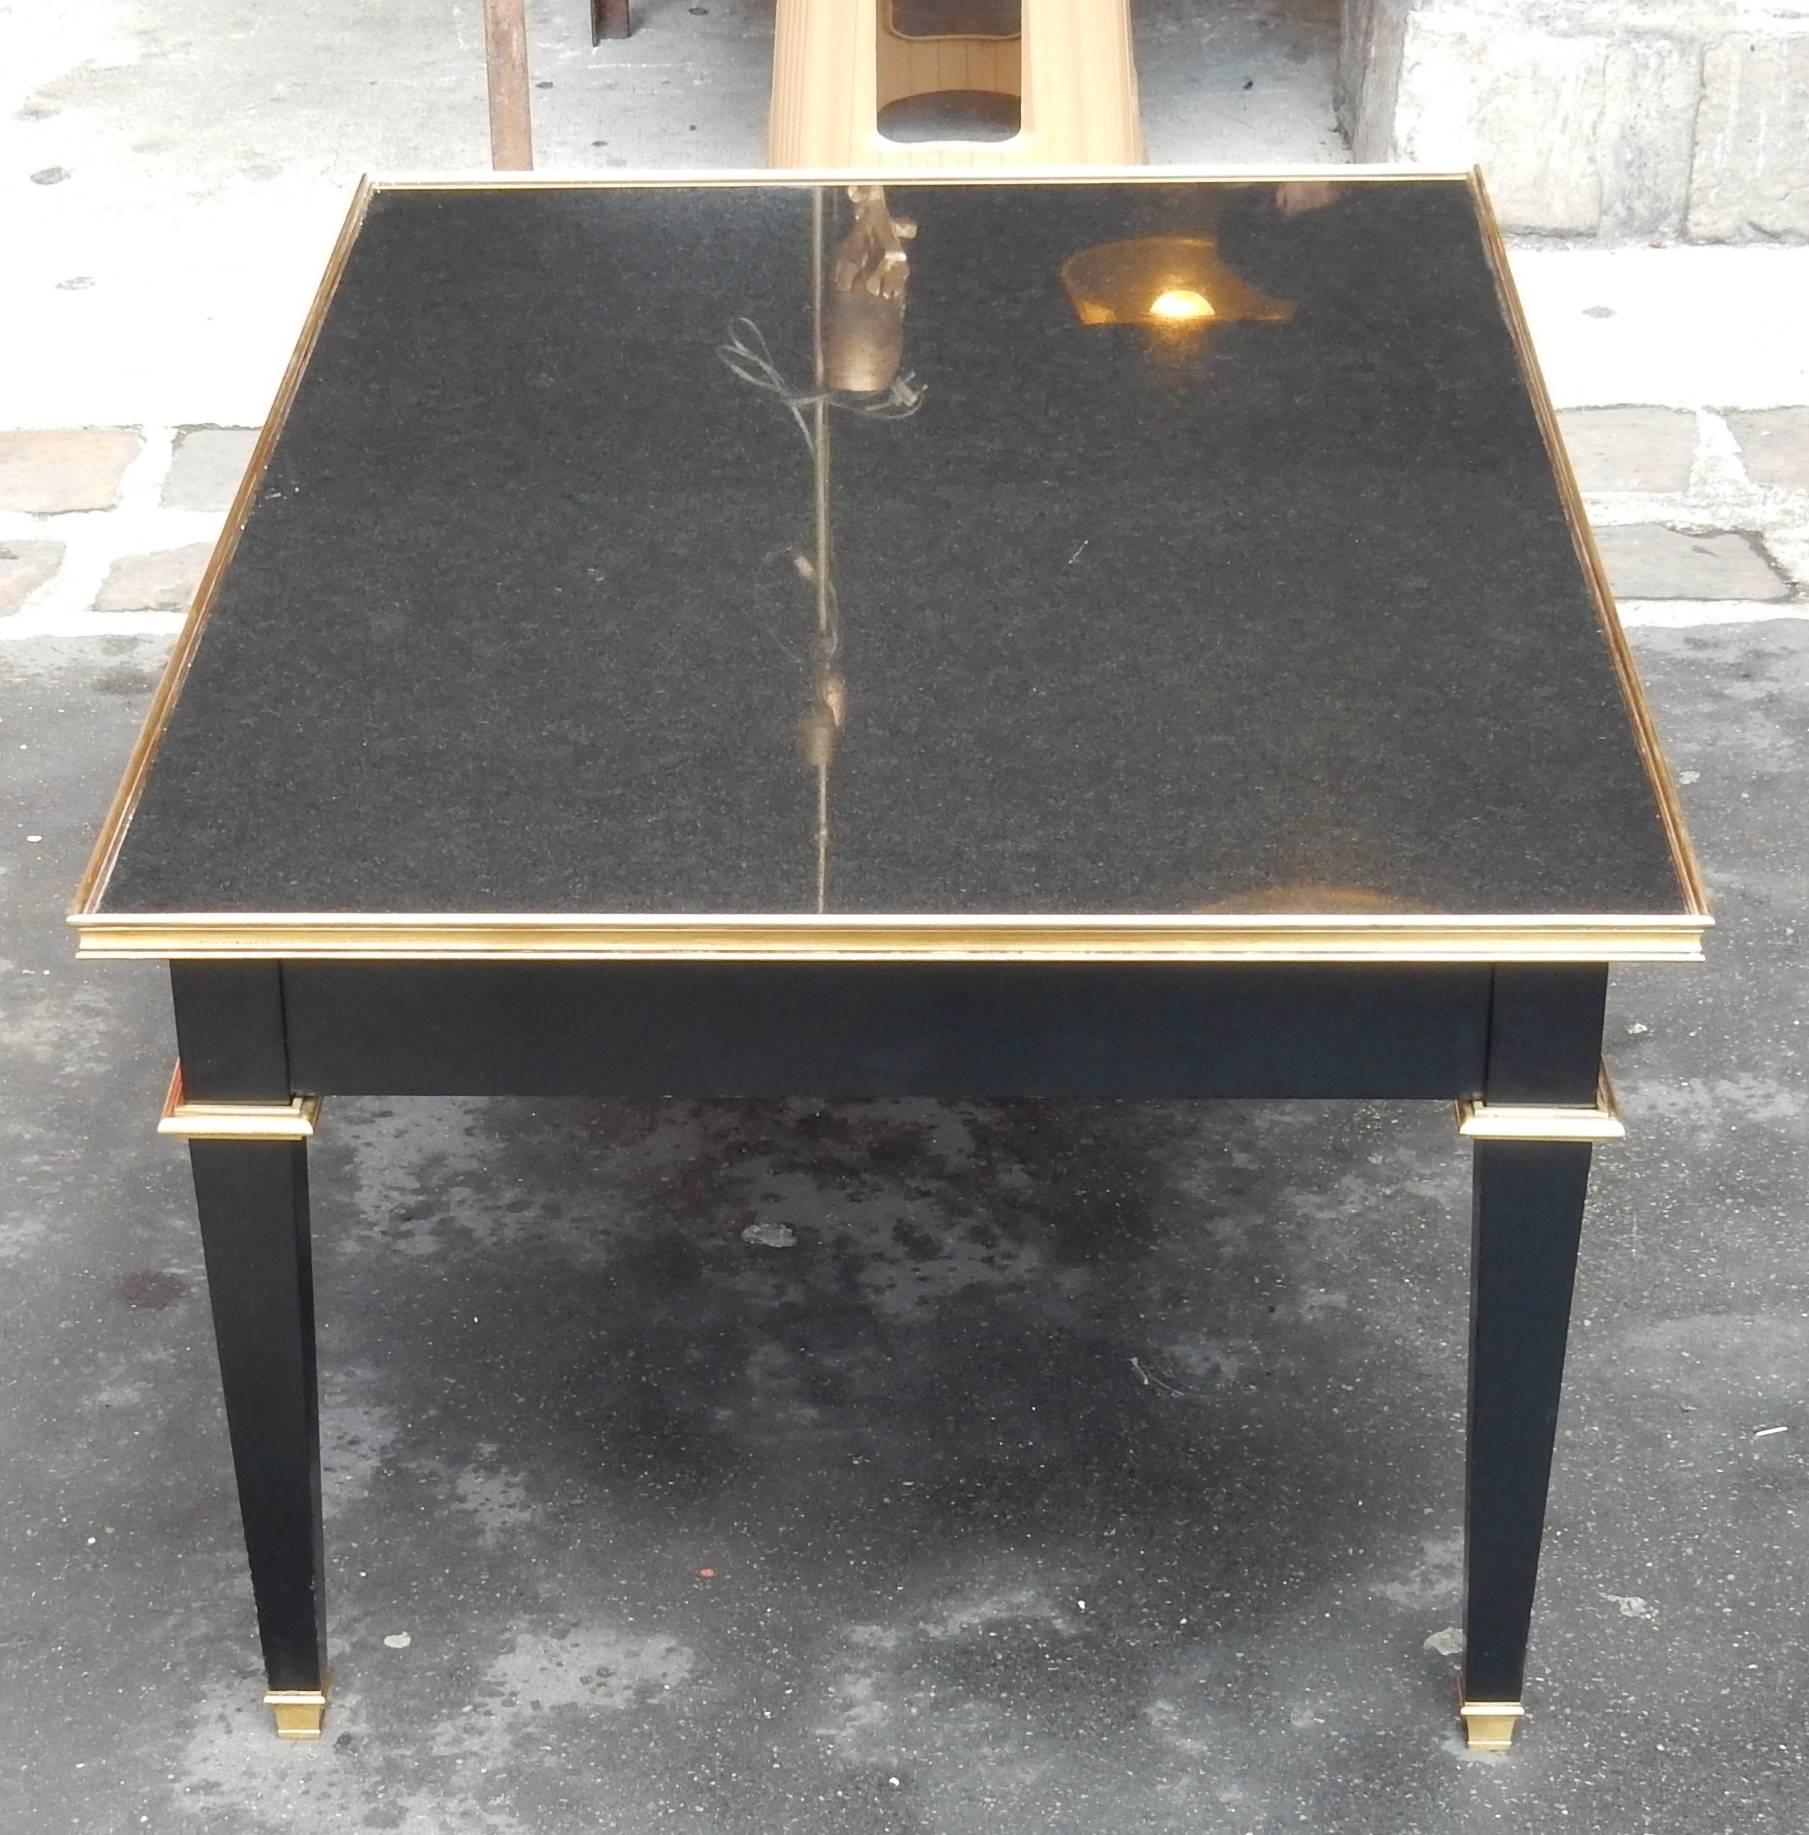 Wooden black lack coffee table covered with a black granite from Zimbabwe with the same grain as Porphyry.
Feet sheaths adorned with bronze bushings and hooves and the tray belt.